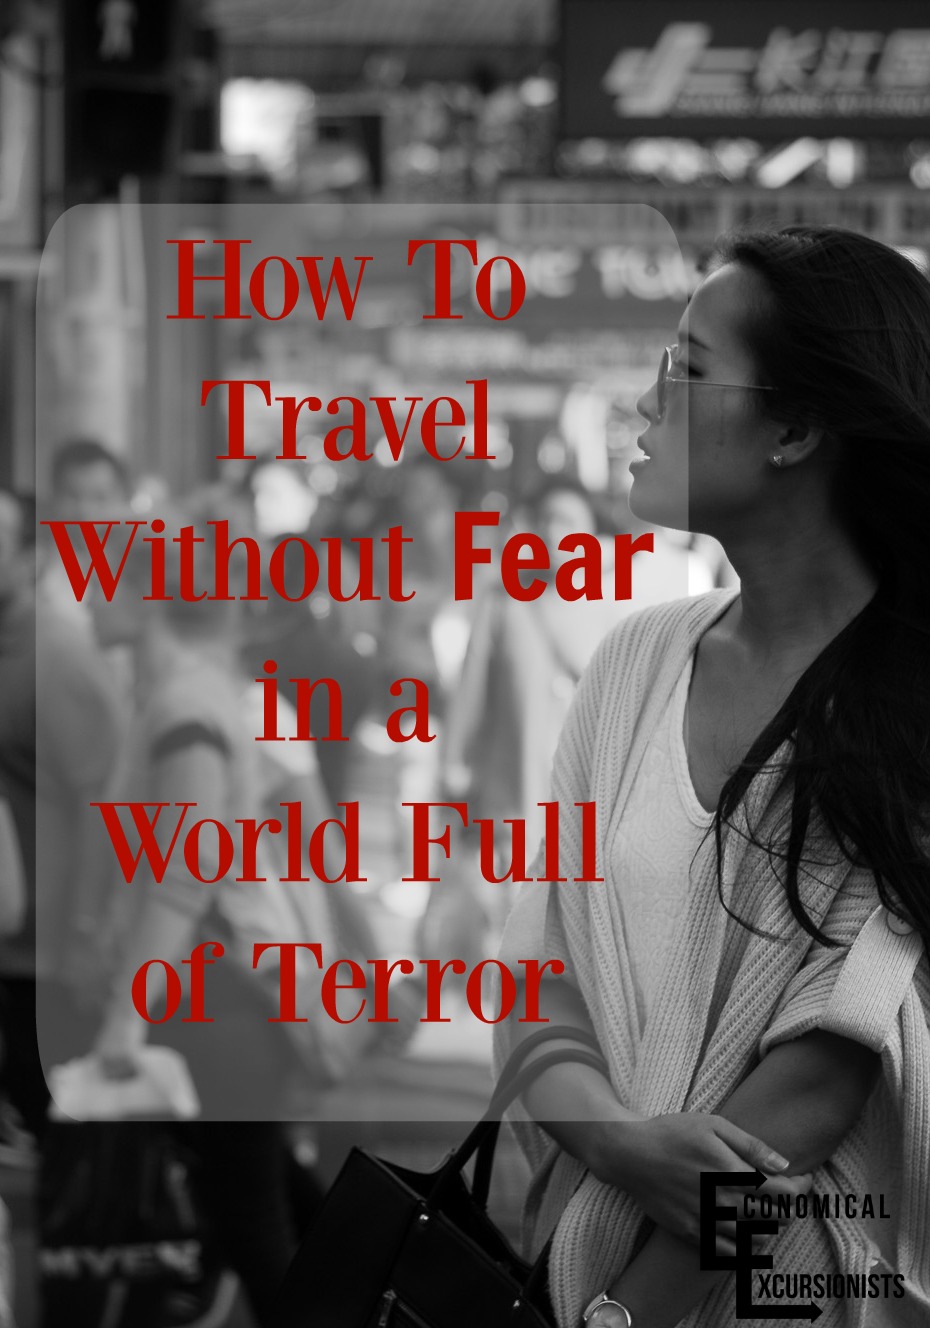 Travel and Terrorism: We can't live our lives in fear. Even if we have to adapt a few ways of traveling, we can't let the idea of terror prevent us from experiencing the world